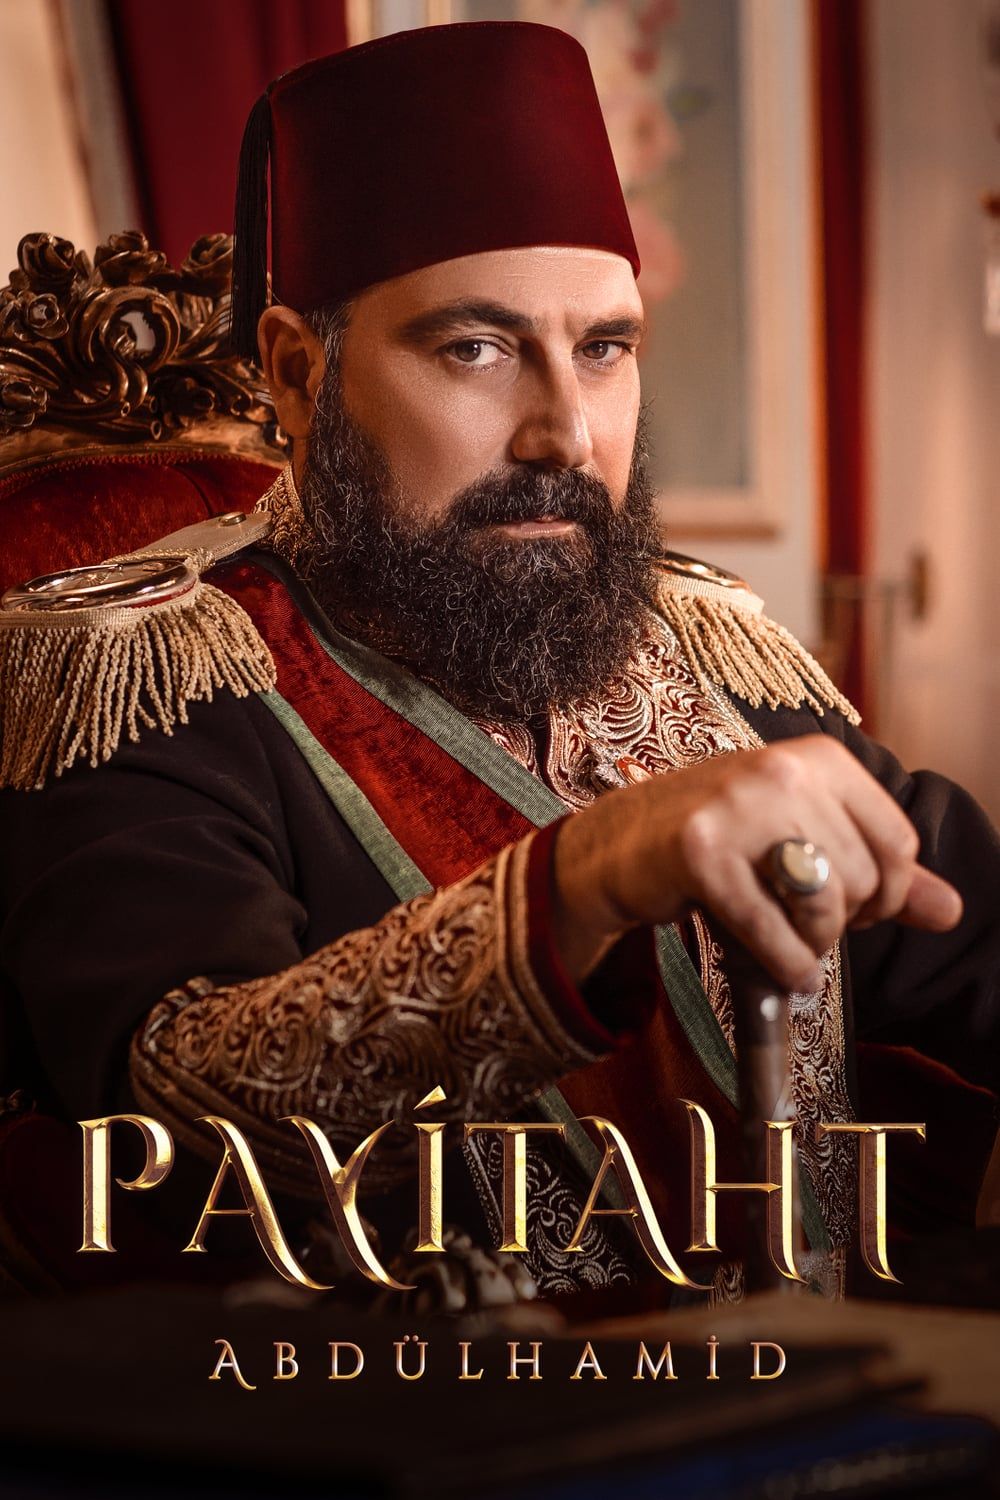 Payitaht Abdulhamid (2017) TV Series. Where To Watch Online